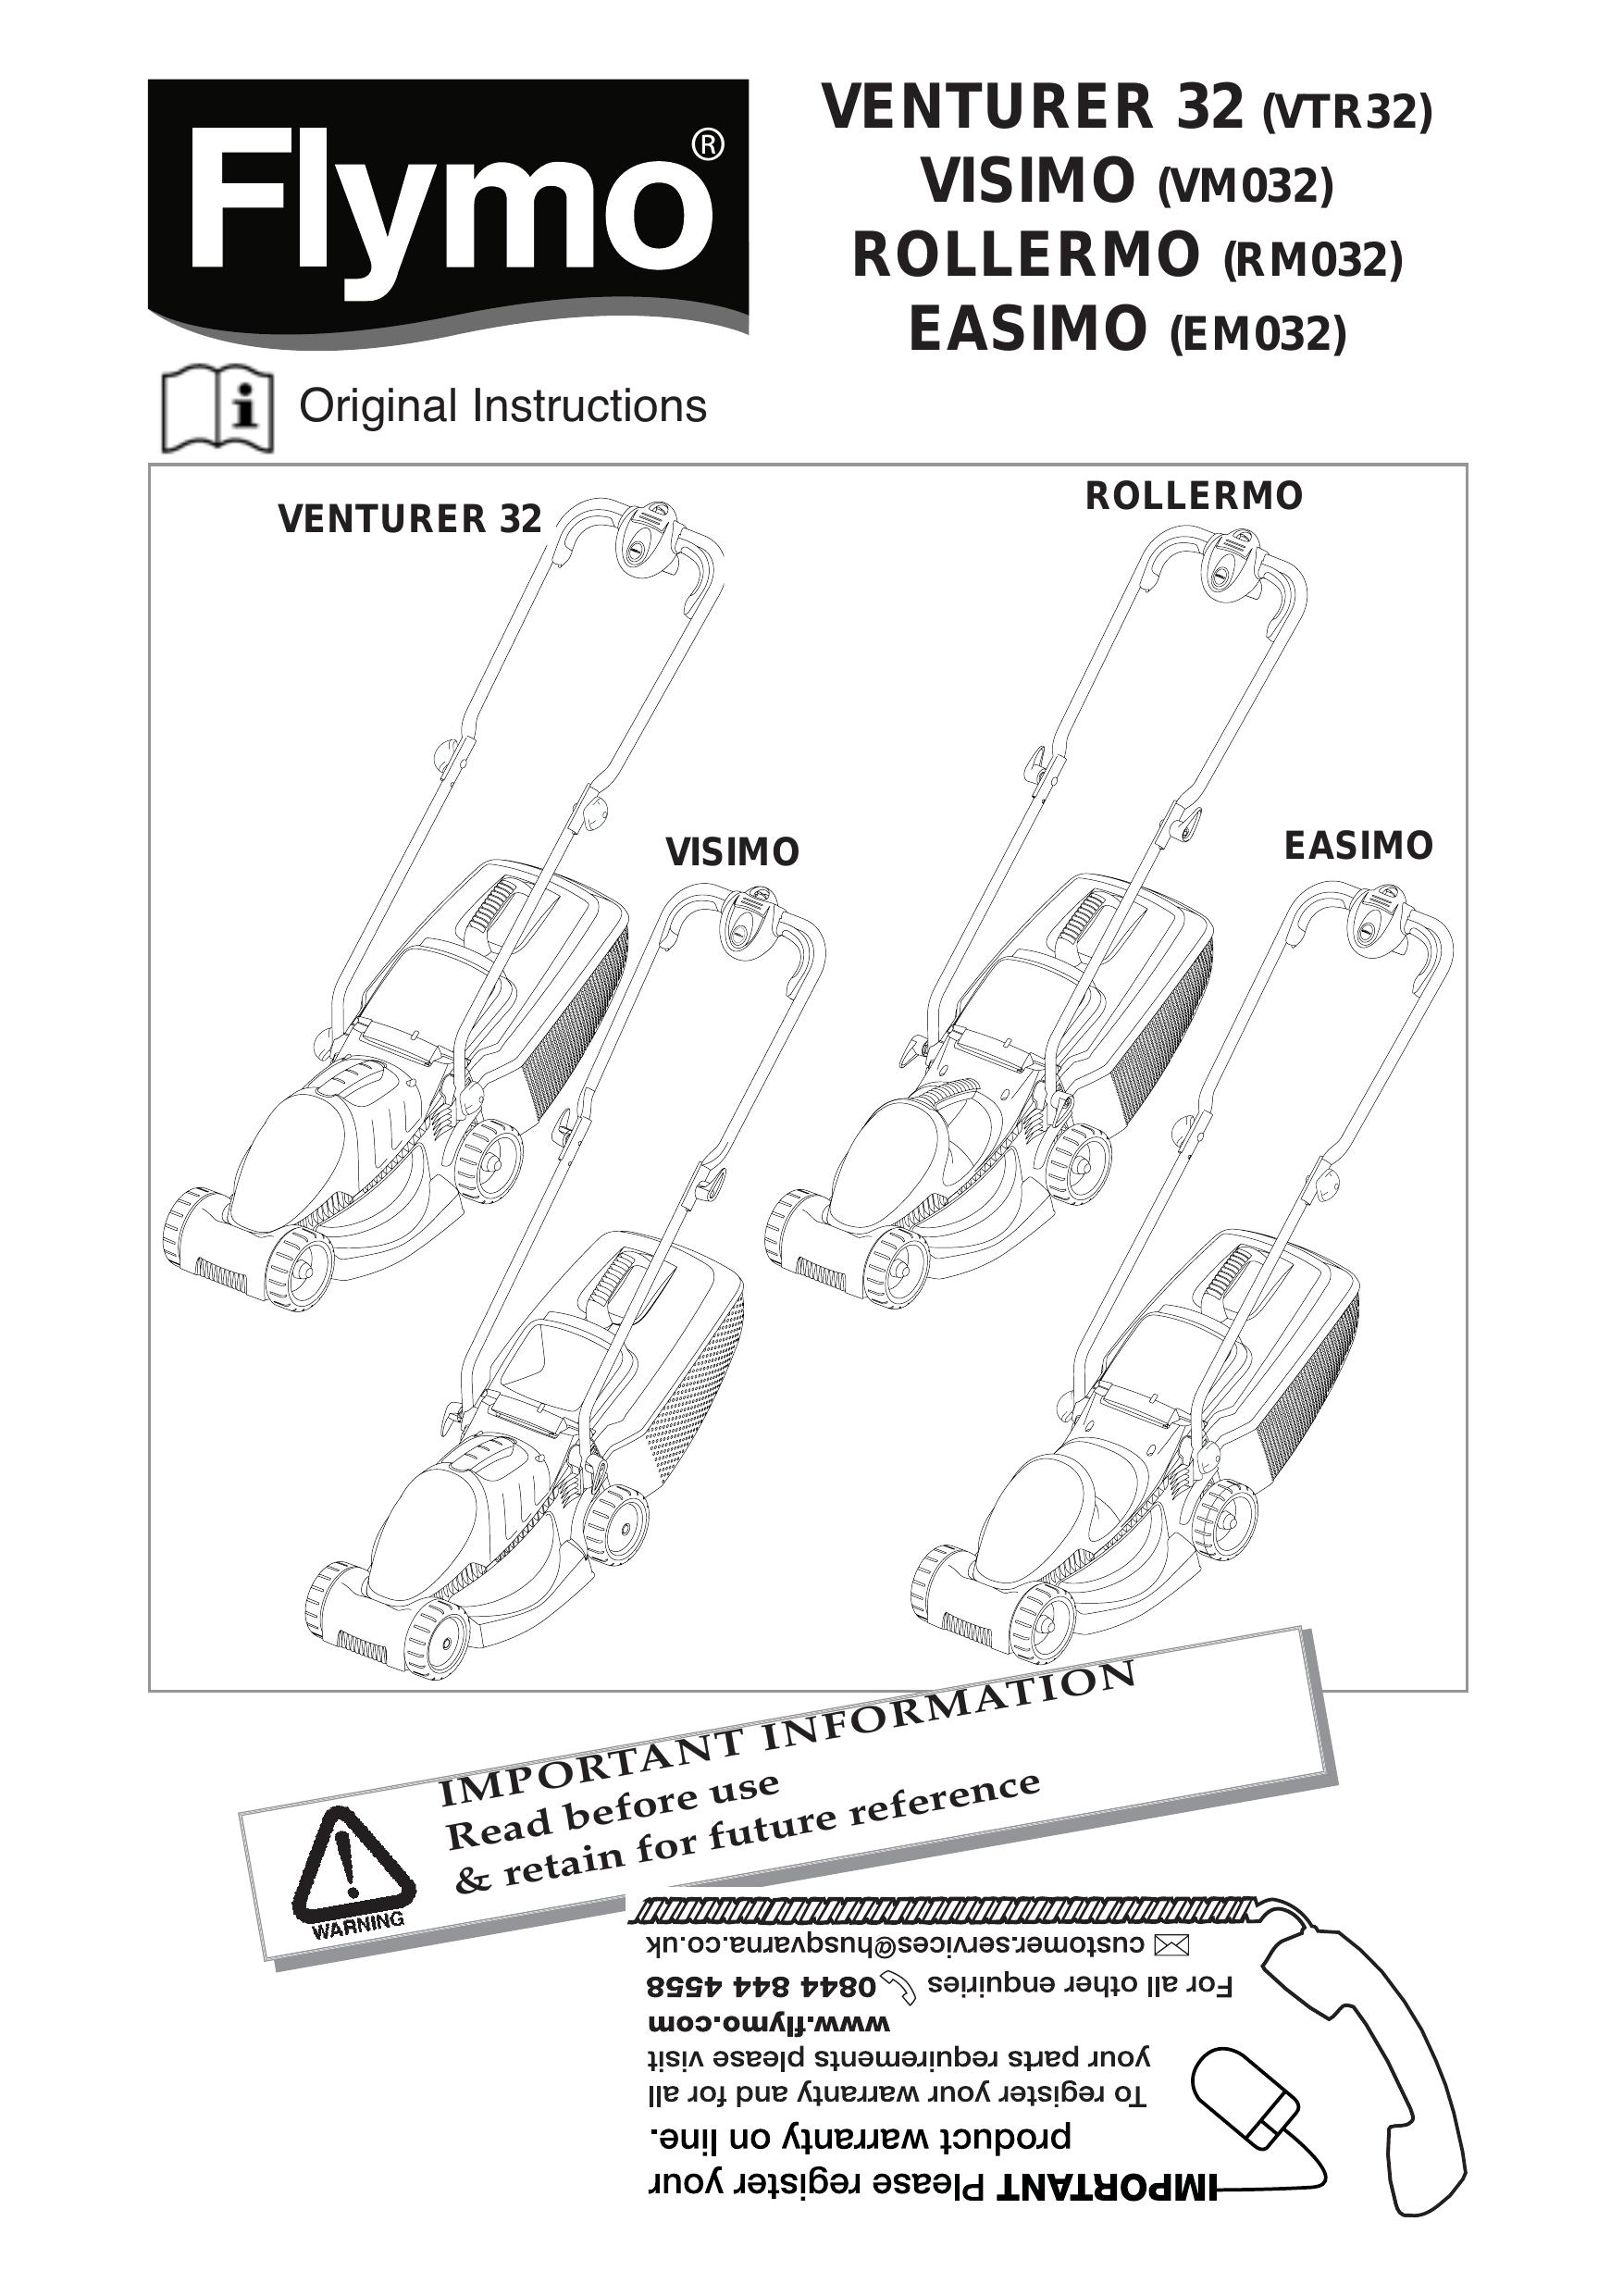 Flymo RM032 Lawn Mower User Manual (Page 1)